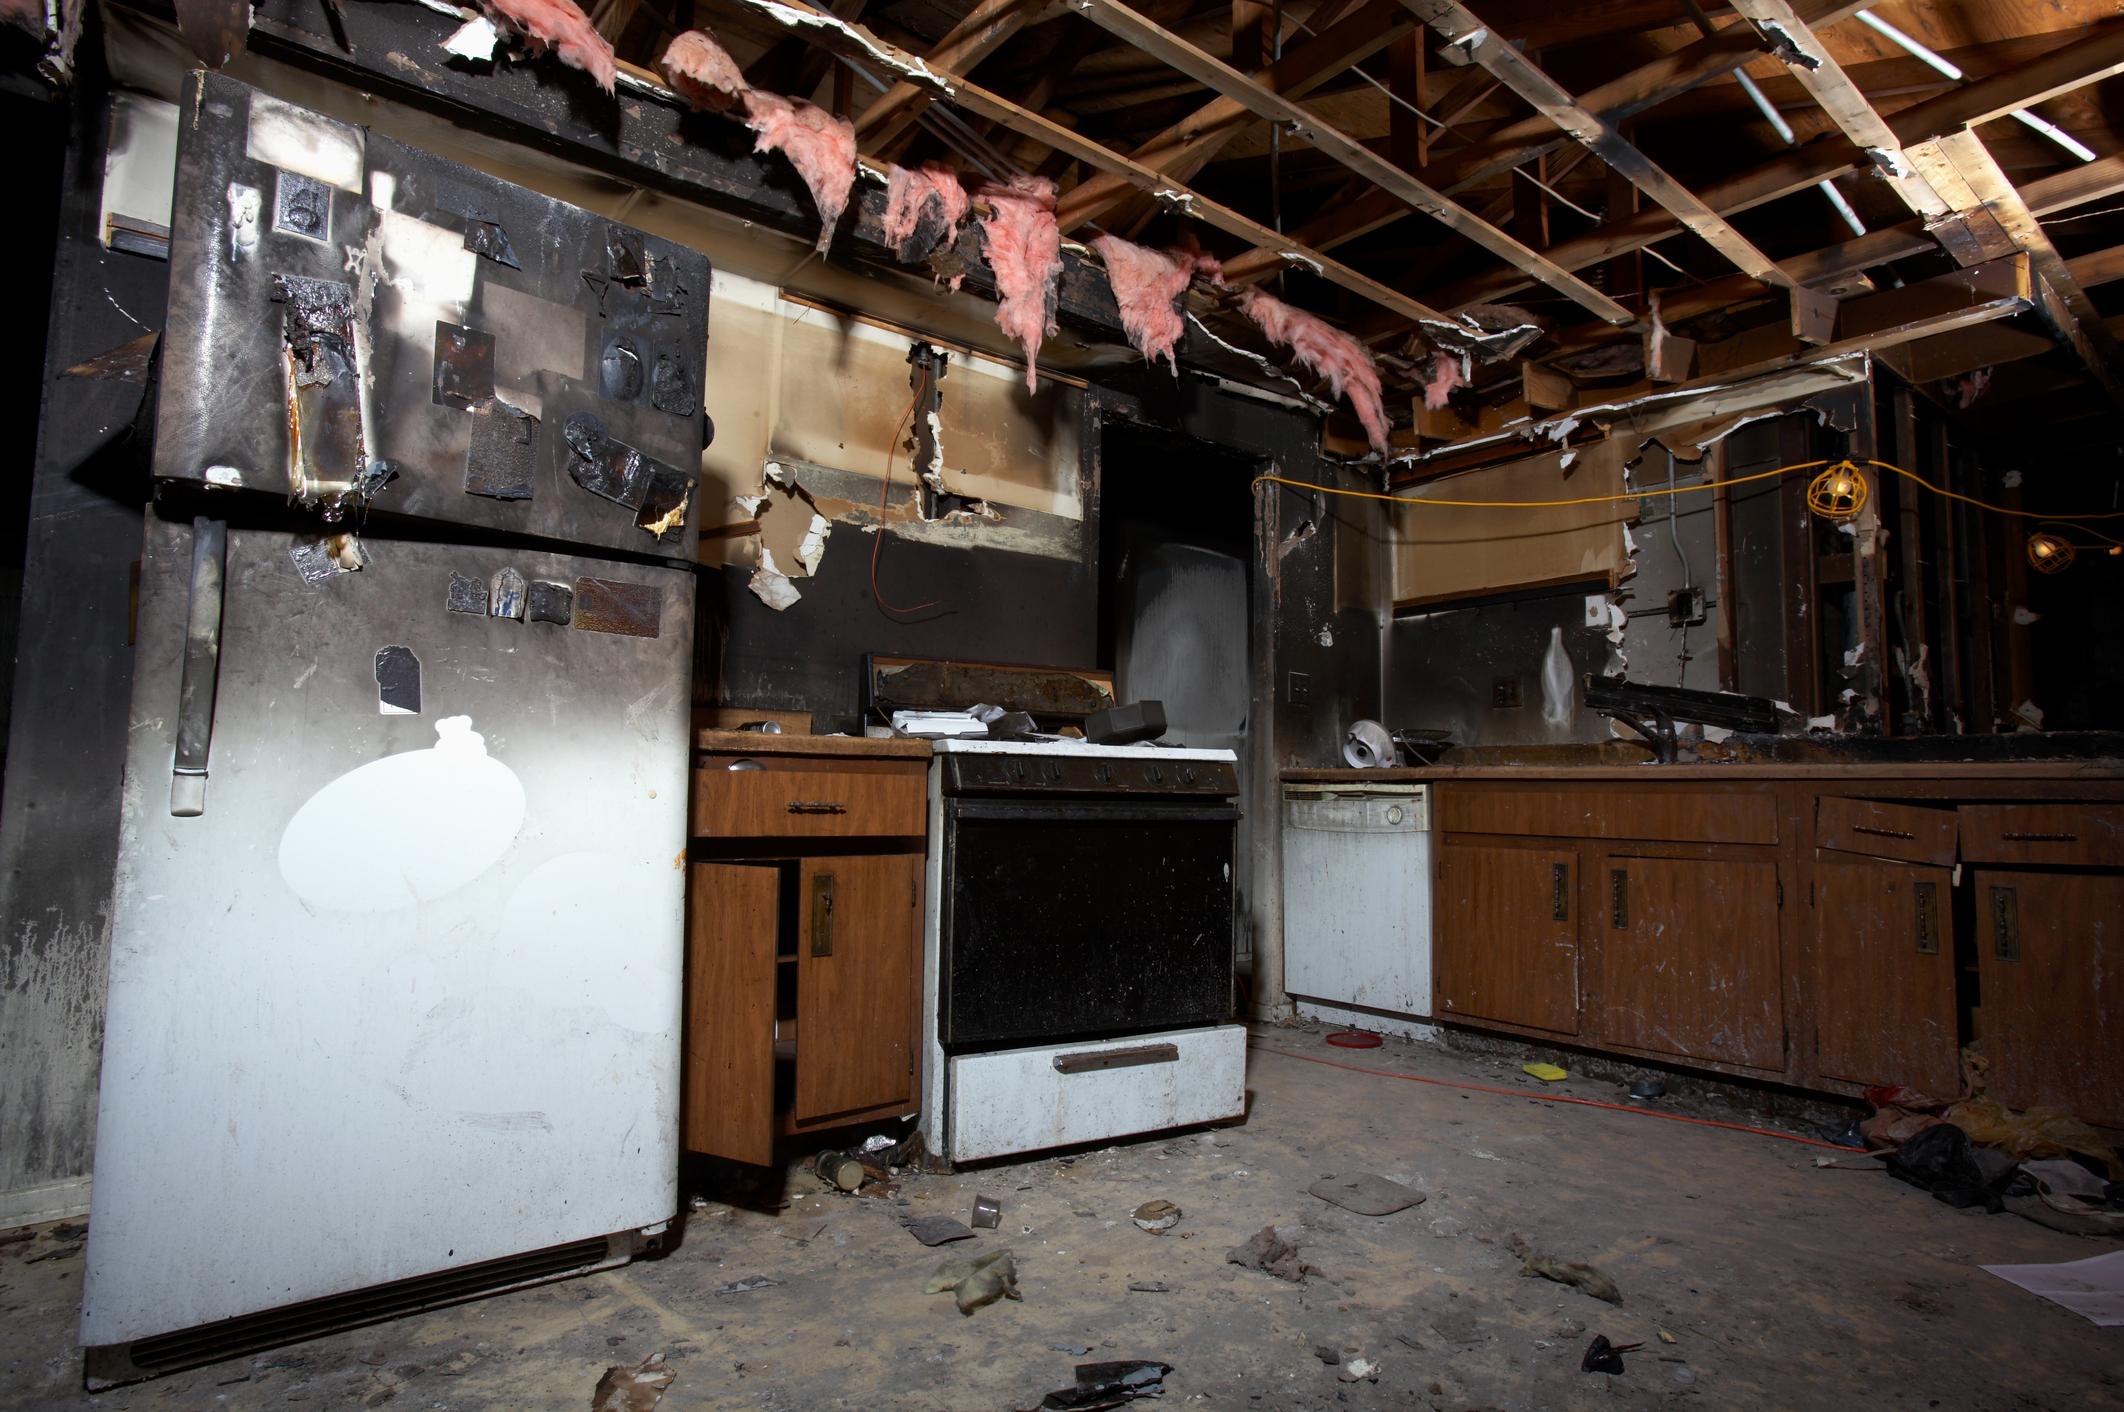 Fires due to faults with refrigeration appliances are rare but lethal